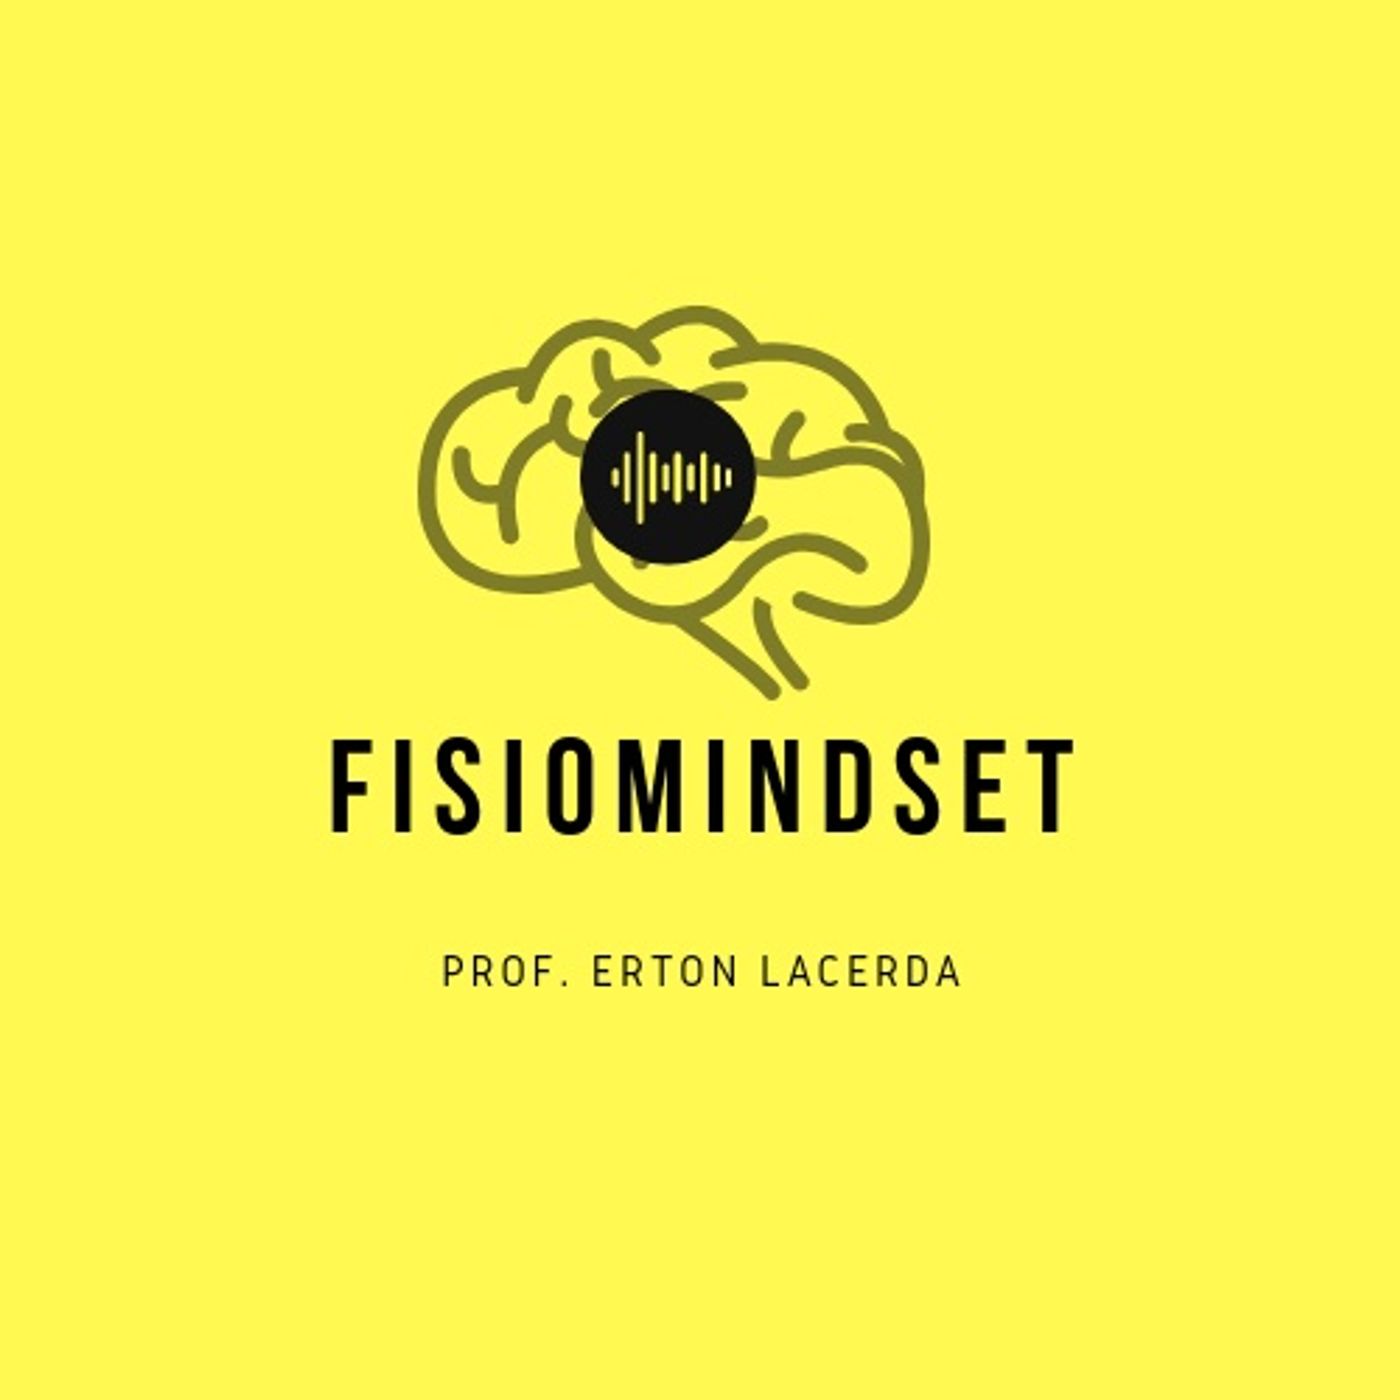 Fisiomindset